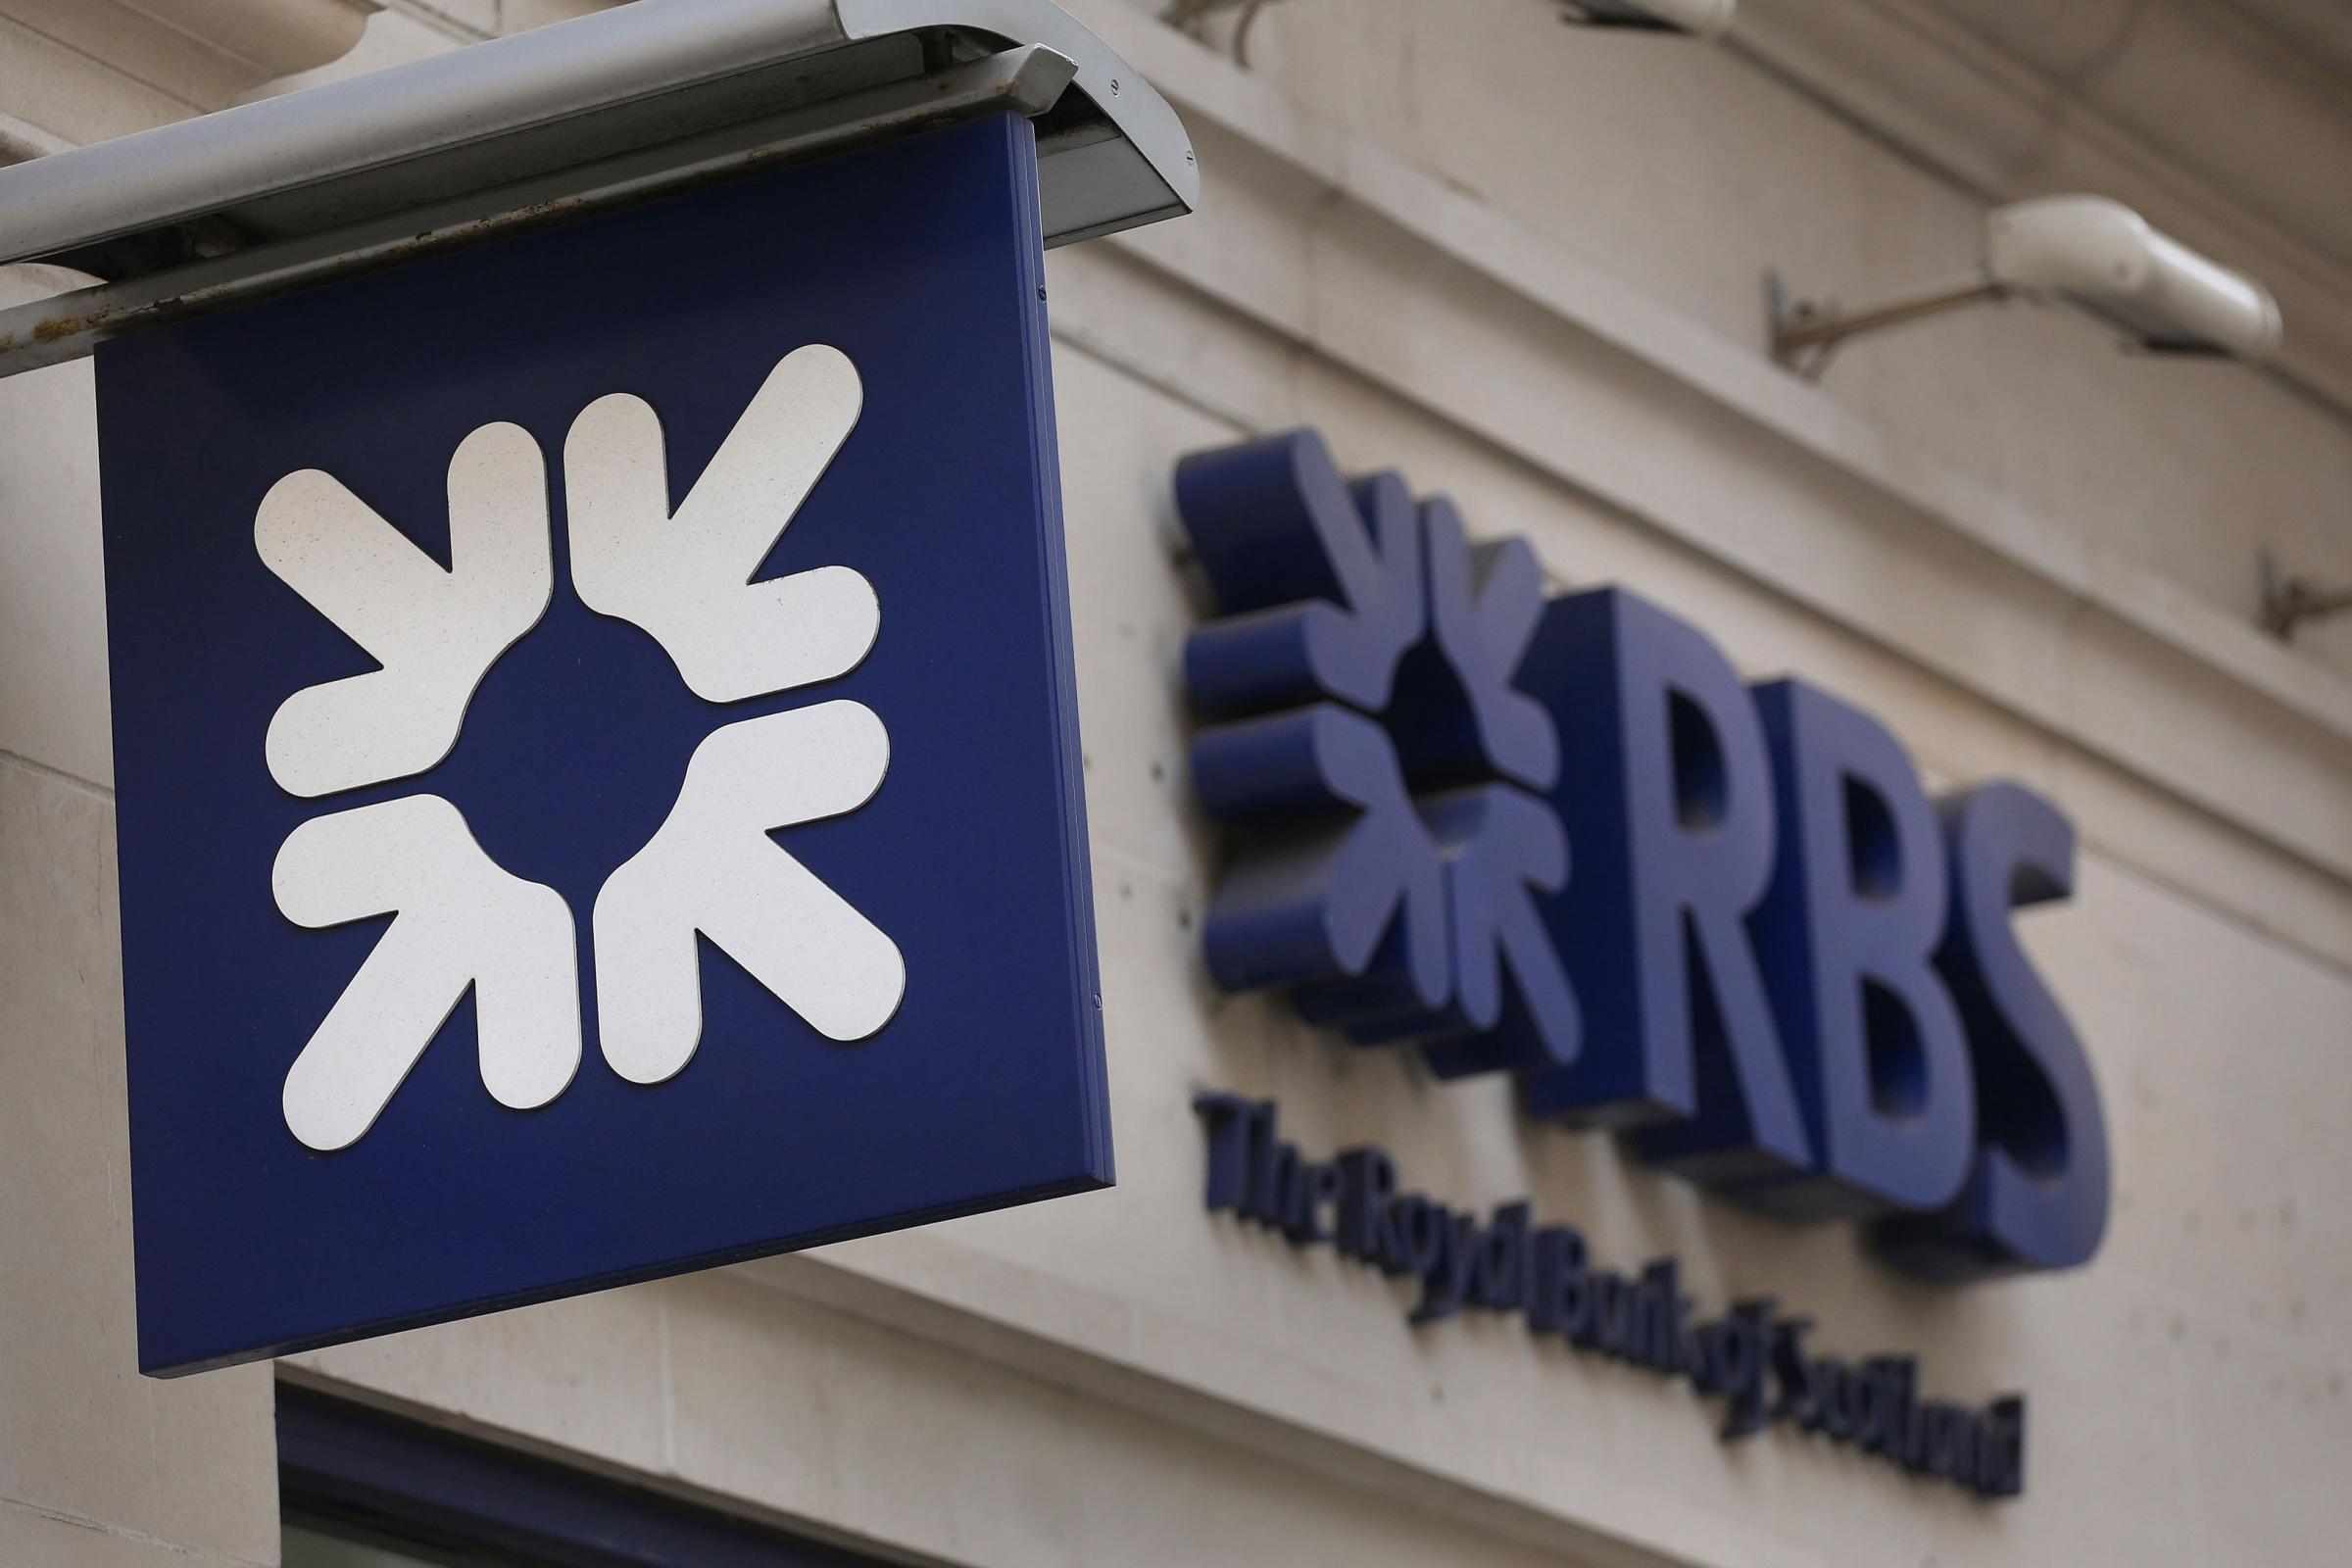 Royal Bank of Scotland paid contractors £400 a day to stuff envelopes